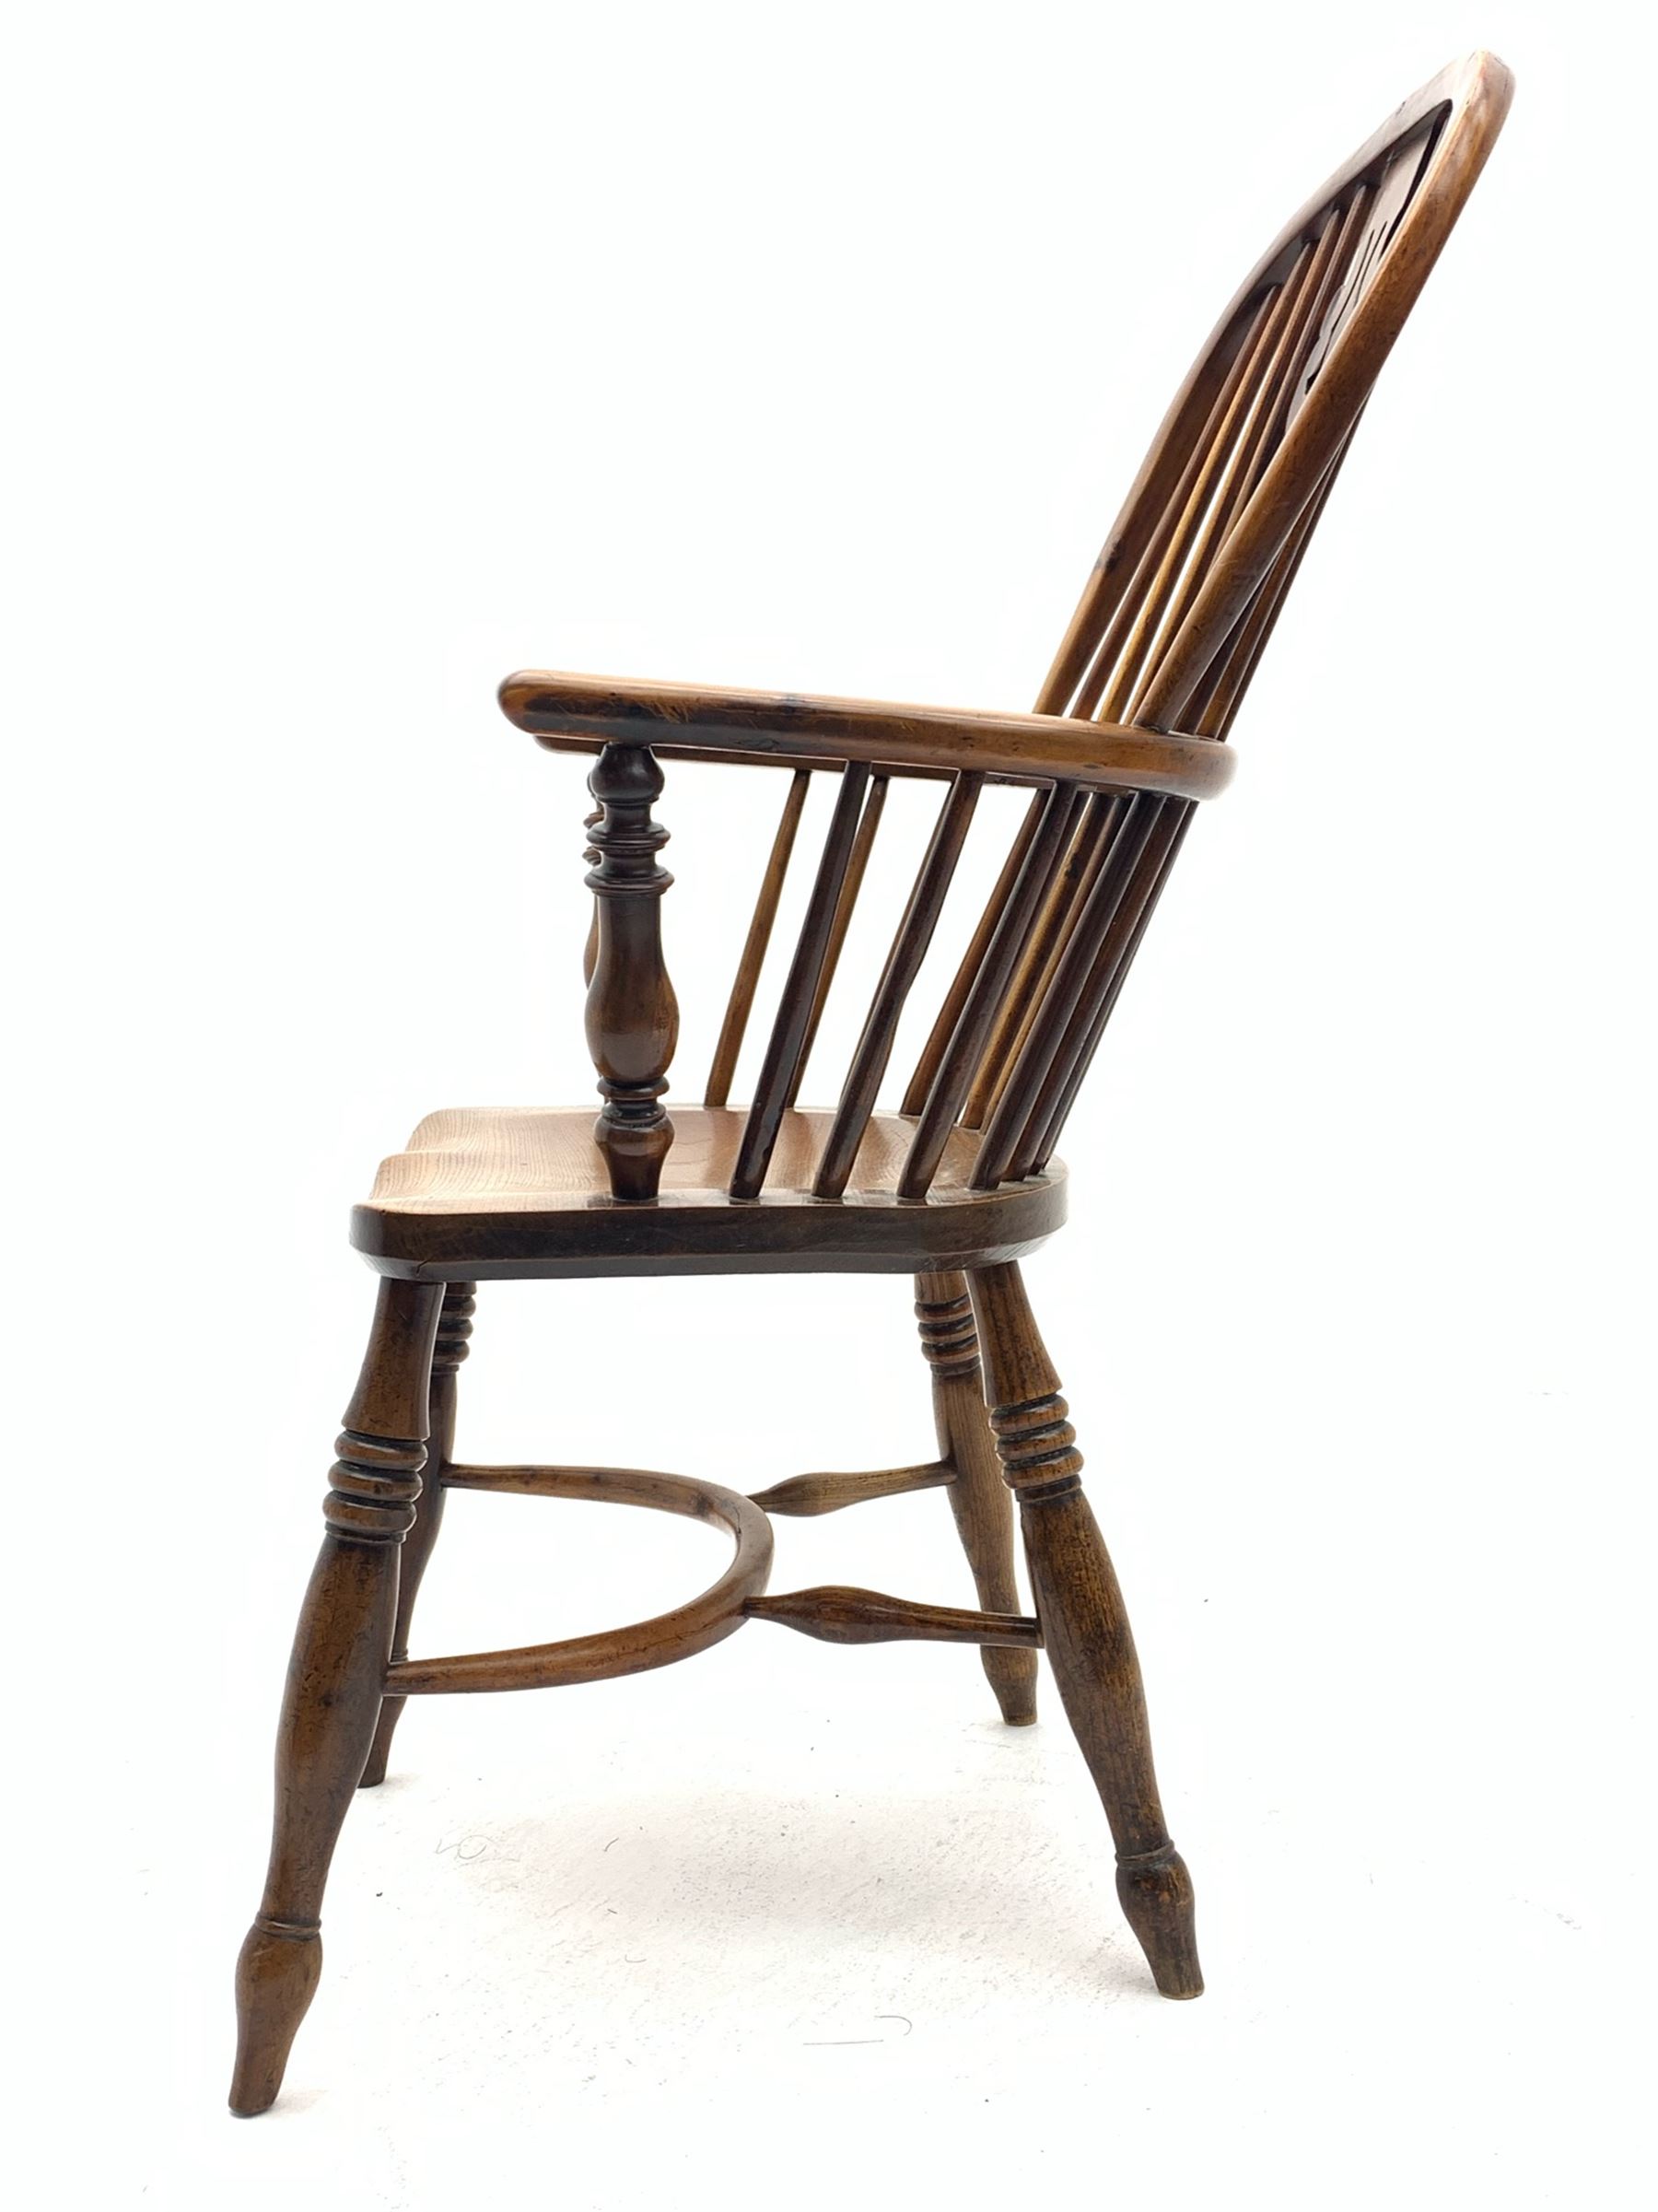 Early 19th century elm and yew wood double hoop Windsor armchair - Image 6 of 7